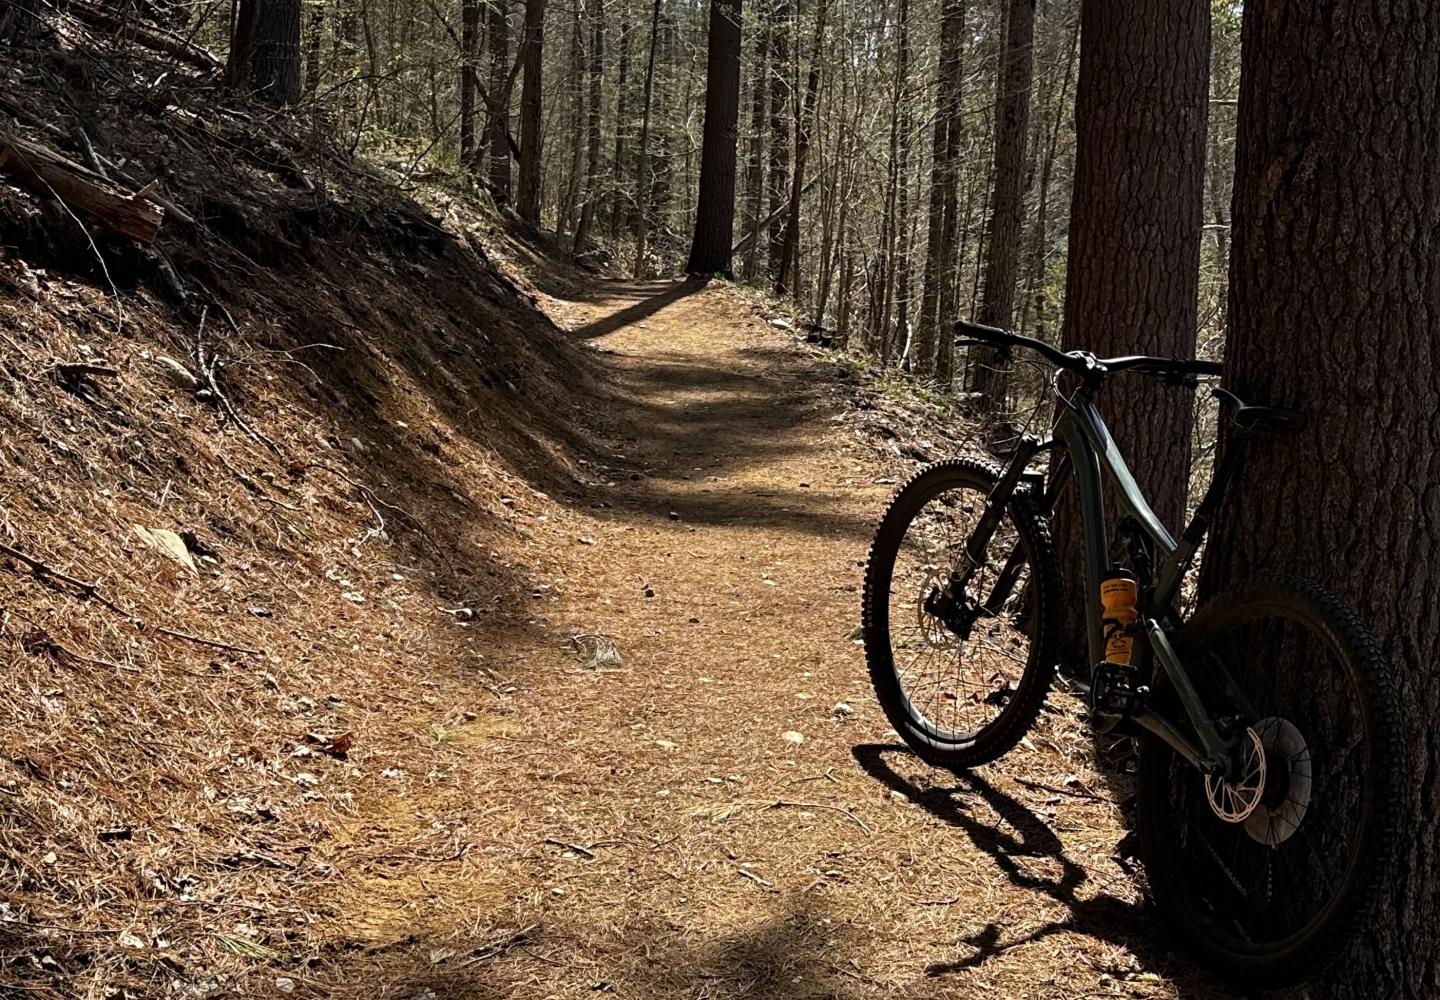 The wide, smooth Leepoff Loop is an ideal trail for novice mountain bikers.